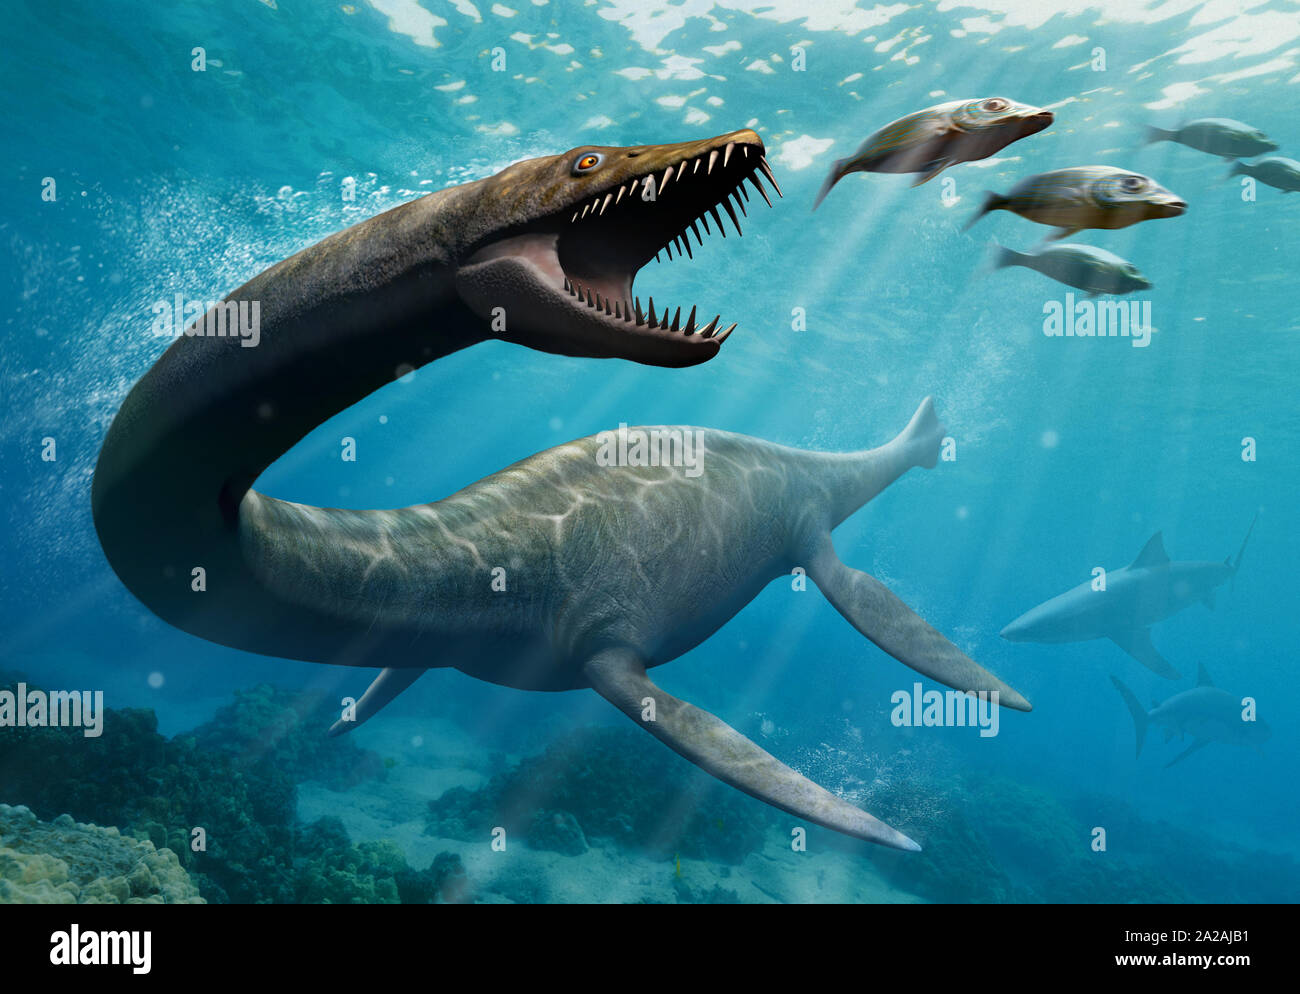 Thalassomedon is hunting fishes Stock Photo